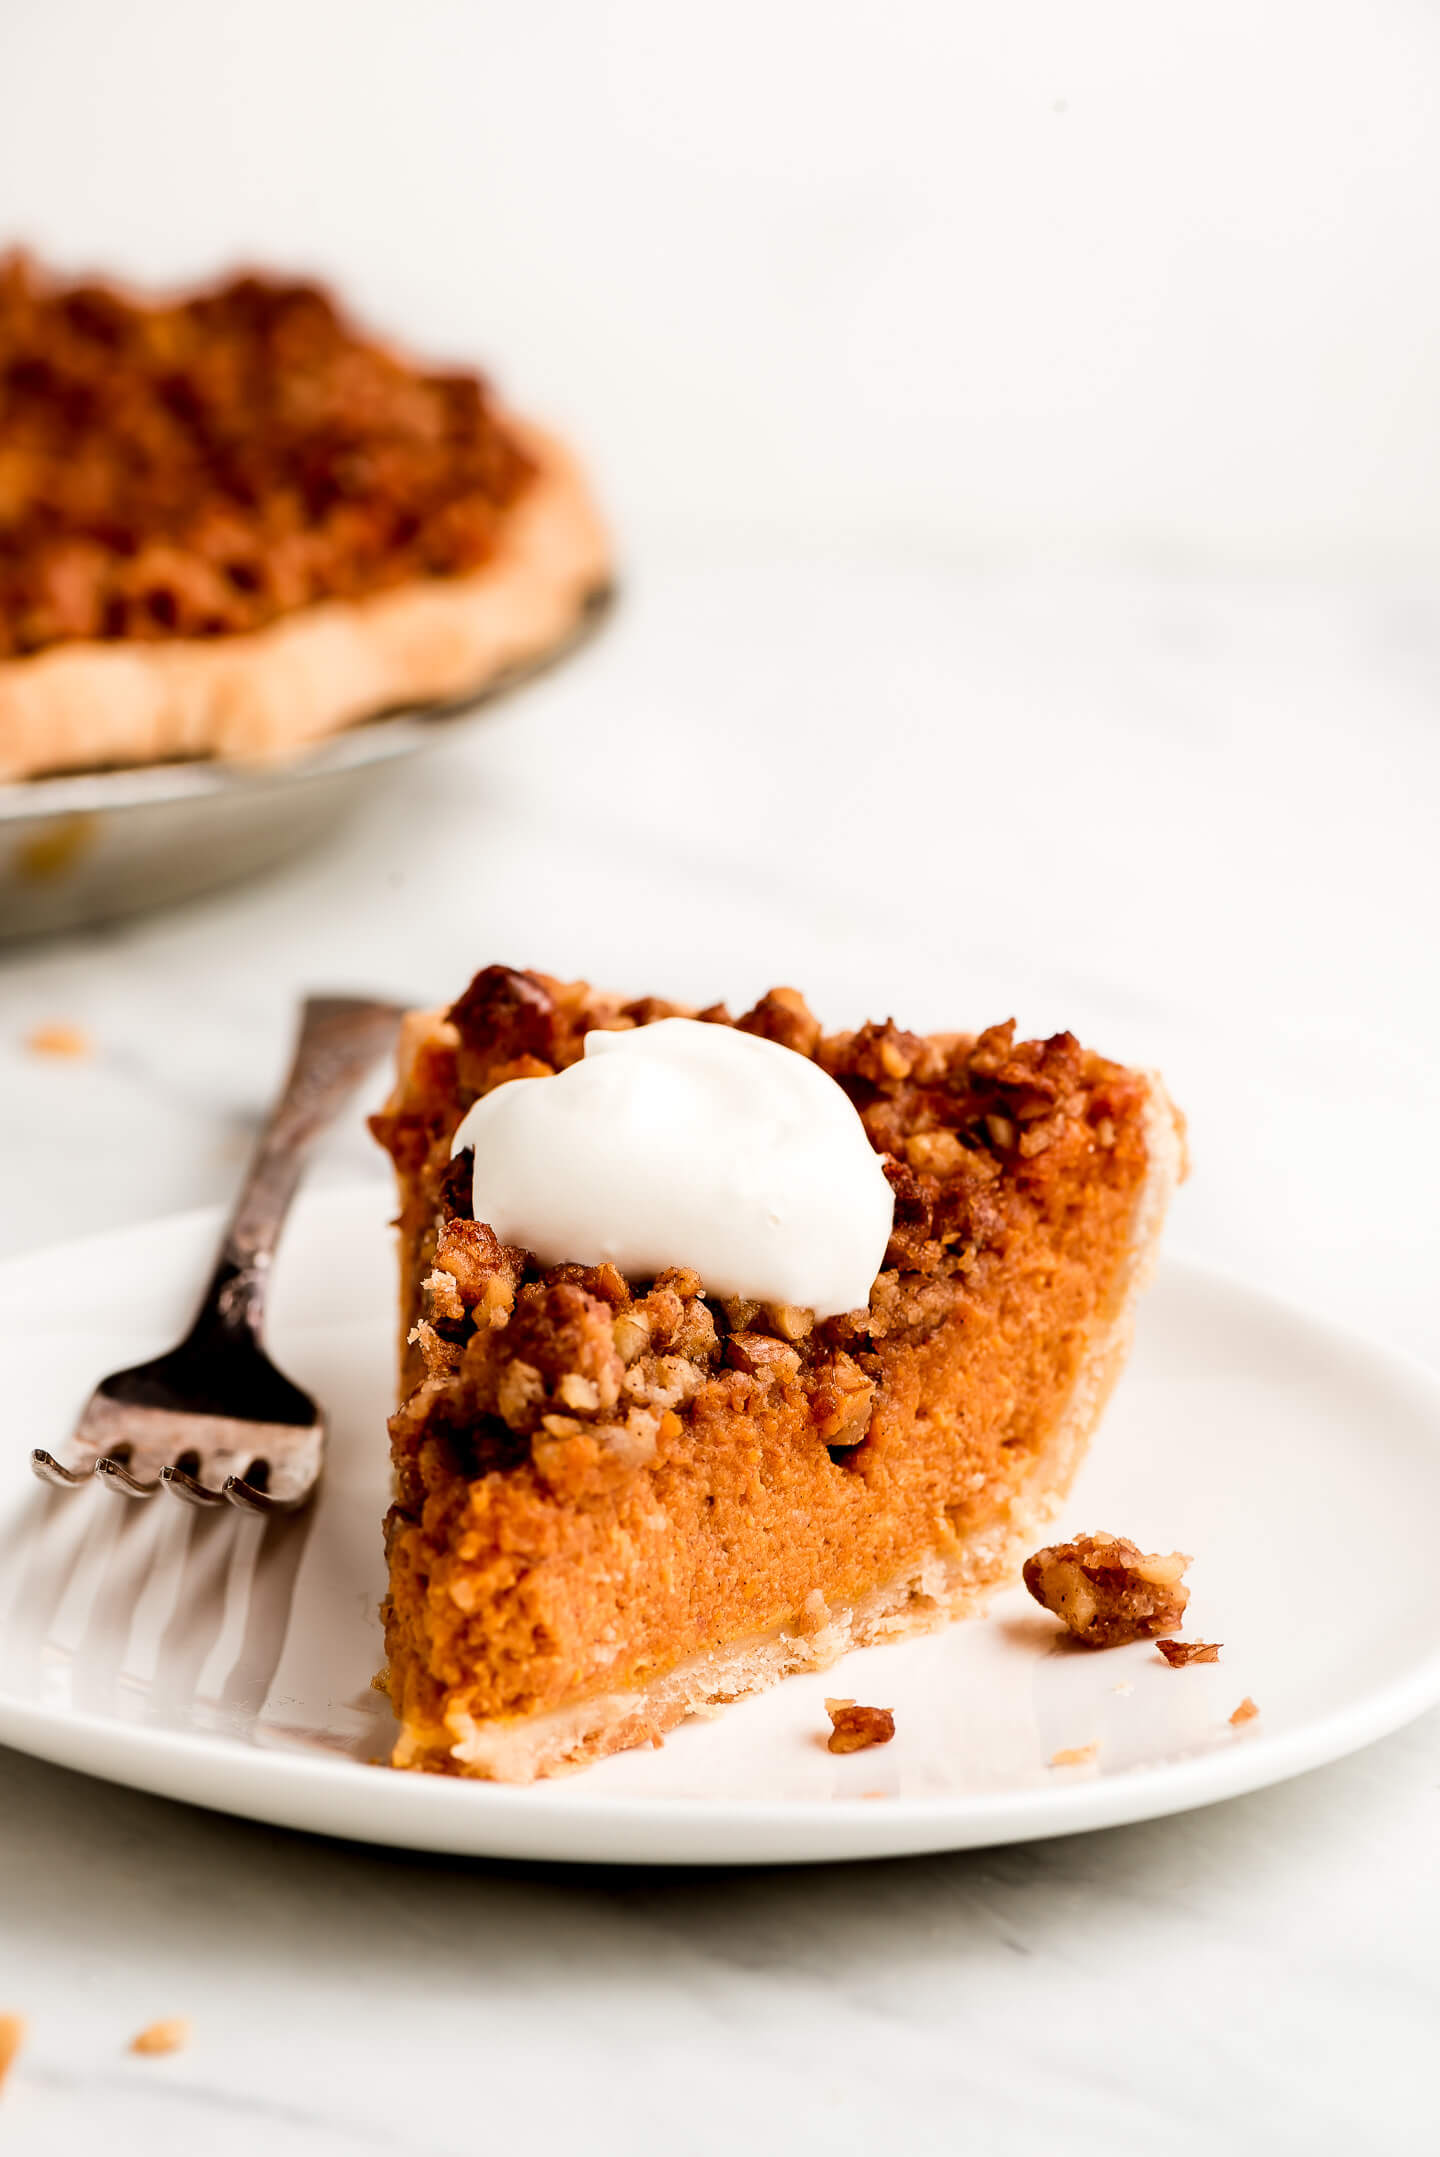 A slice of Pumpkin Streusel Pie garnished with whipped cream on a plate.